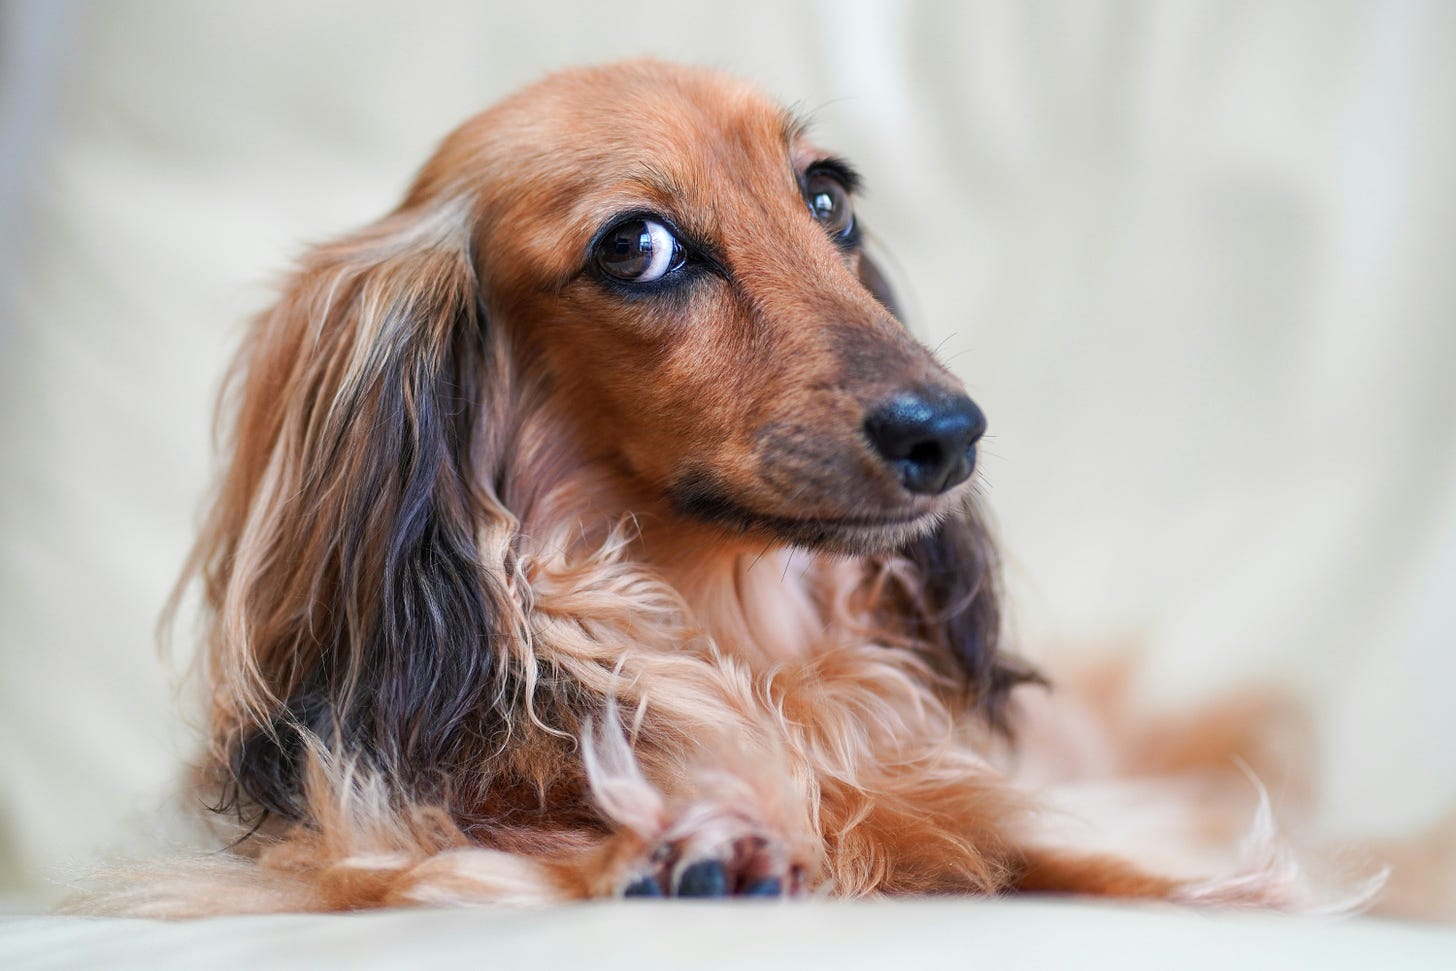 A long-haired buff colored dachshund giving side-eye